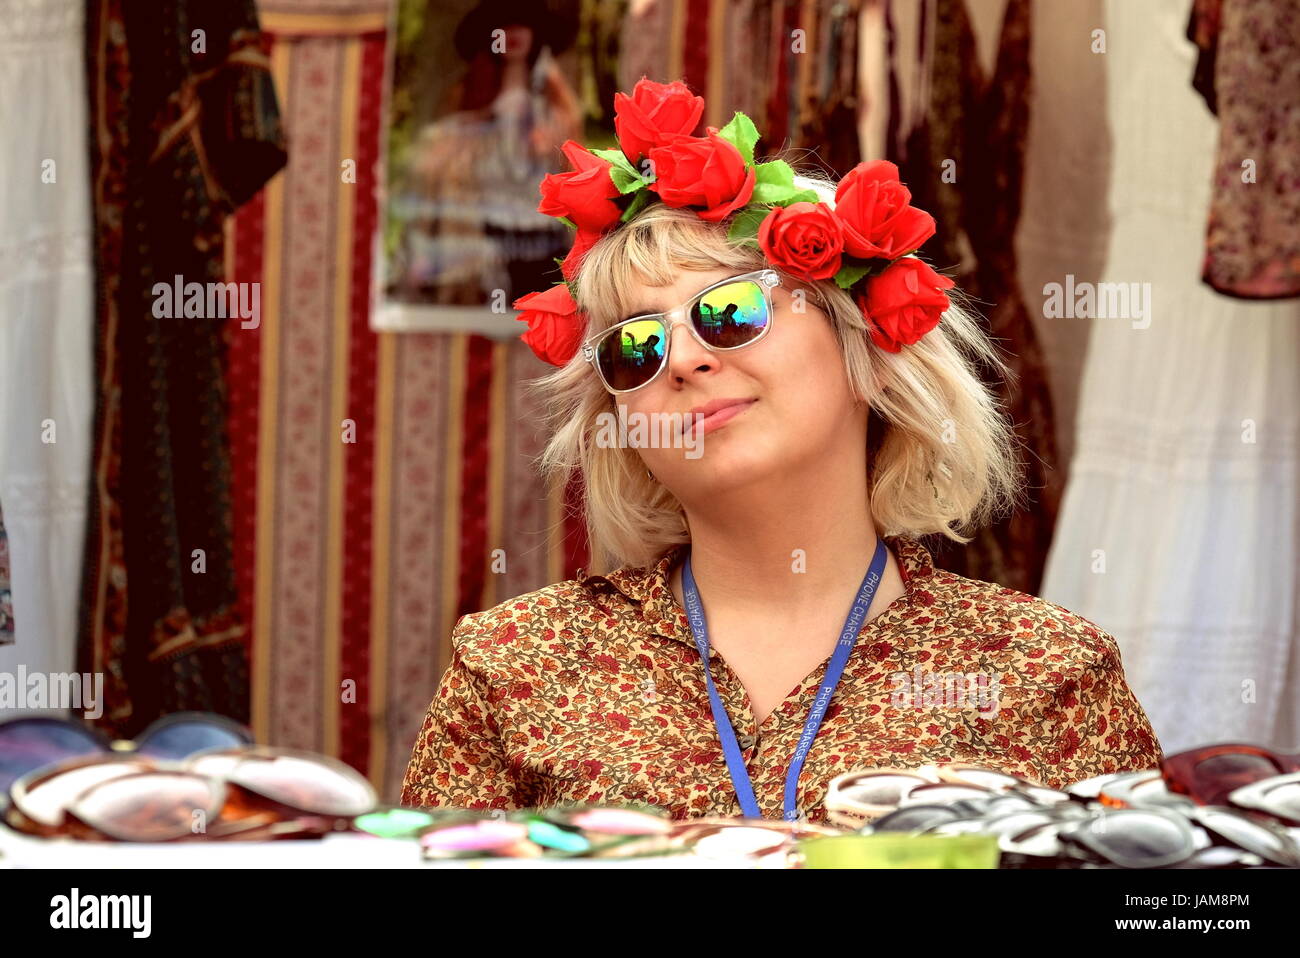 Woman with red roses in hair wearing  1950s dress selling retro clothing,  vintage items, antiques at outdoor festival market stall, Stock Photo